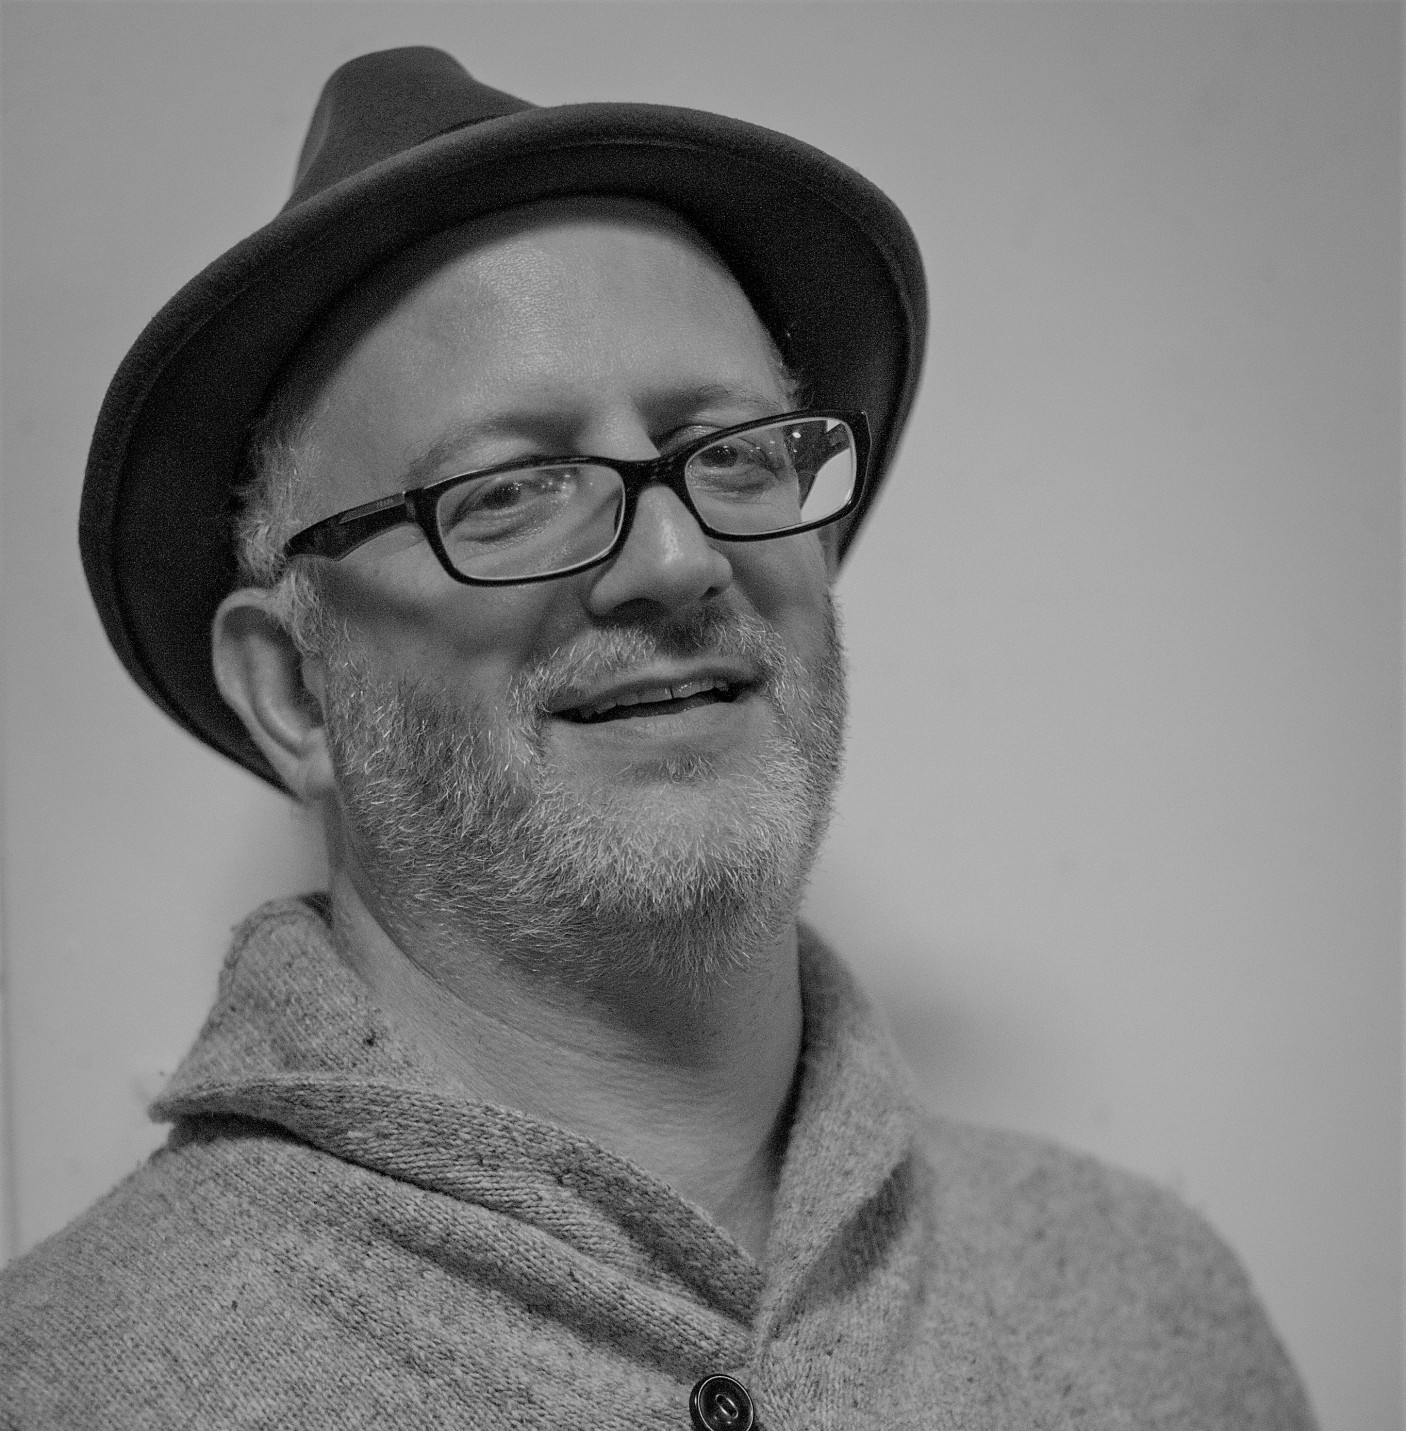 Benjamin is standing against a blank background. He is wearing a hat, a sweater and glasses. The picture is in black and white.